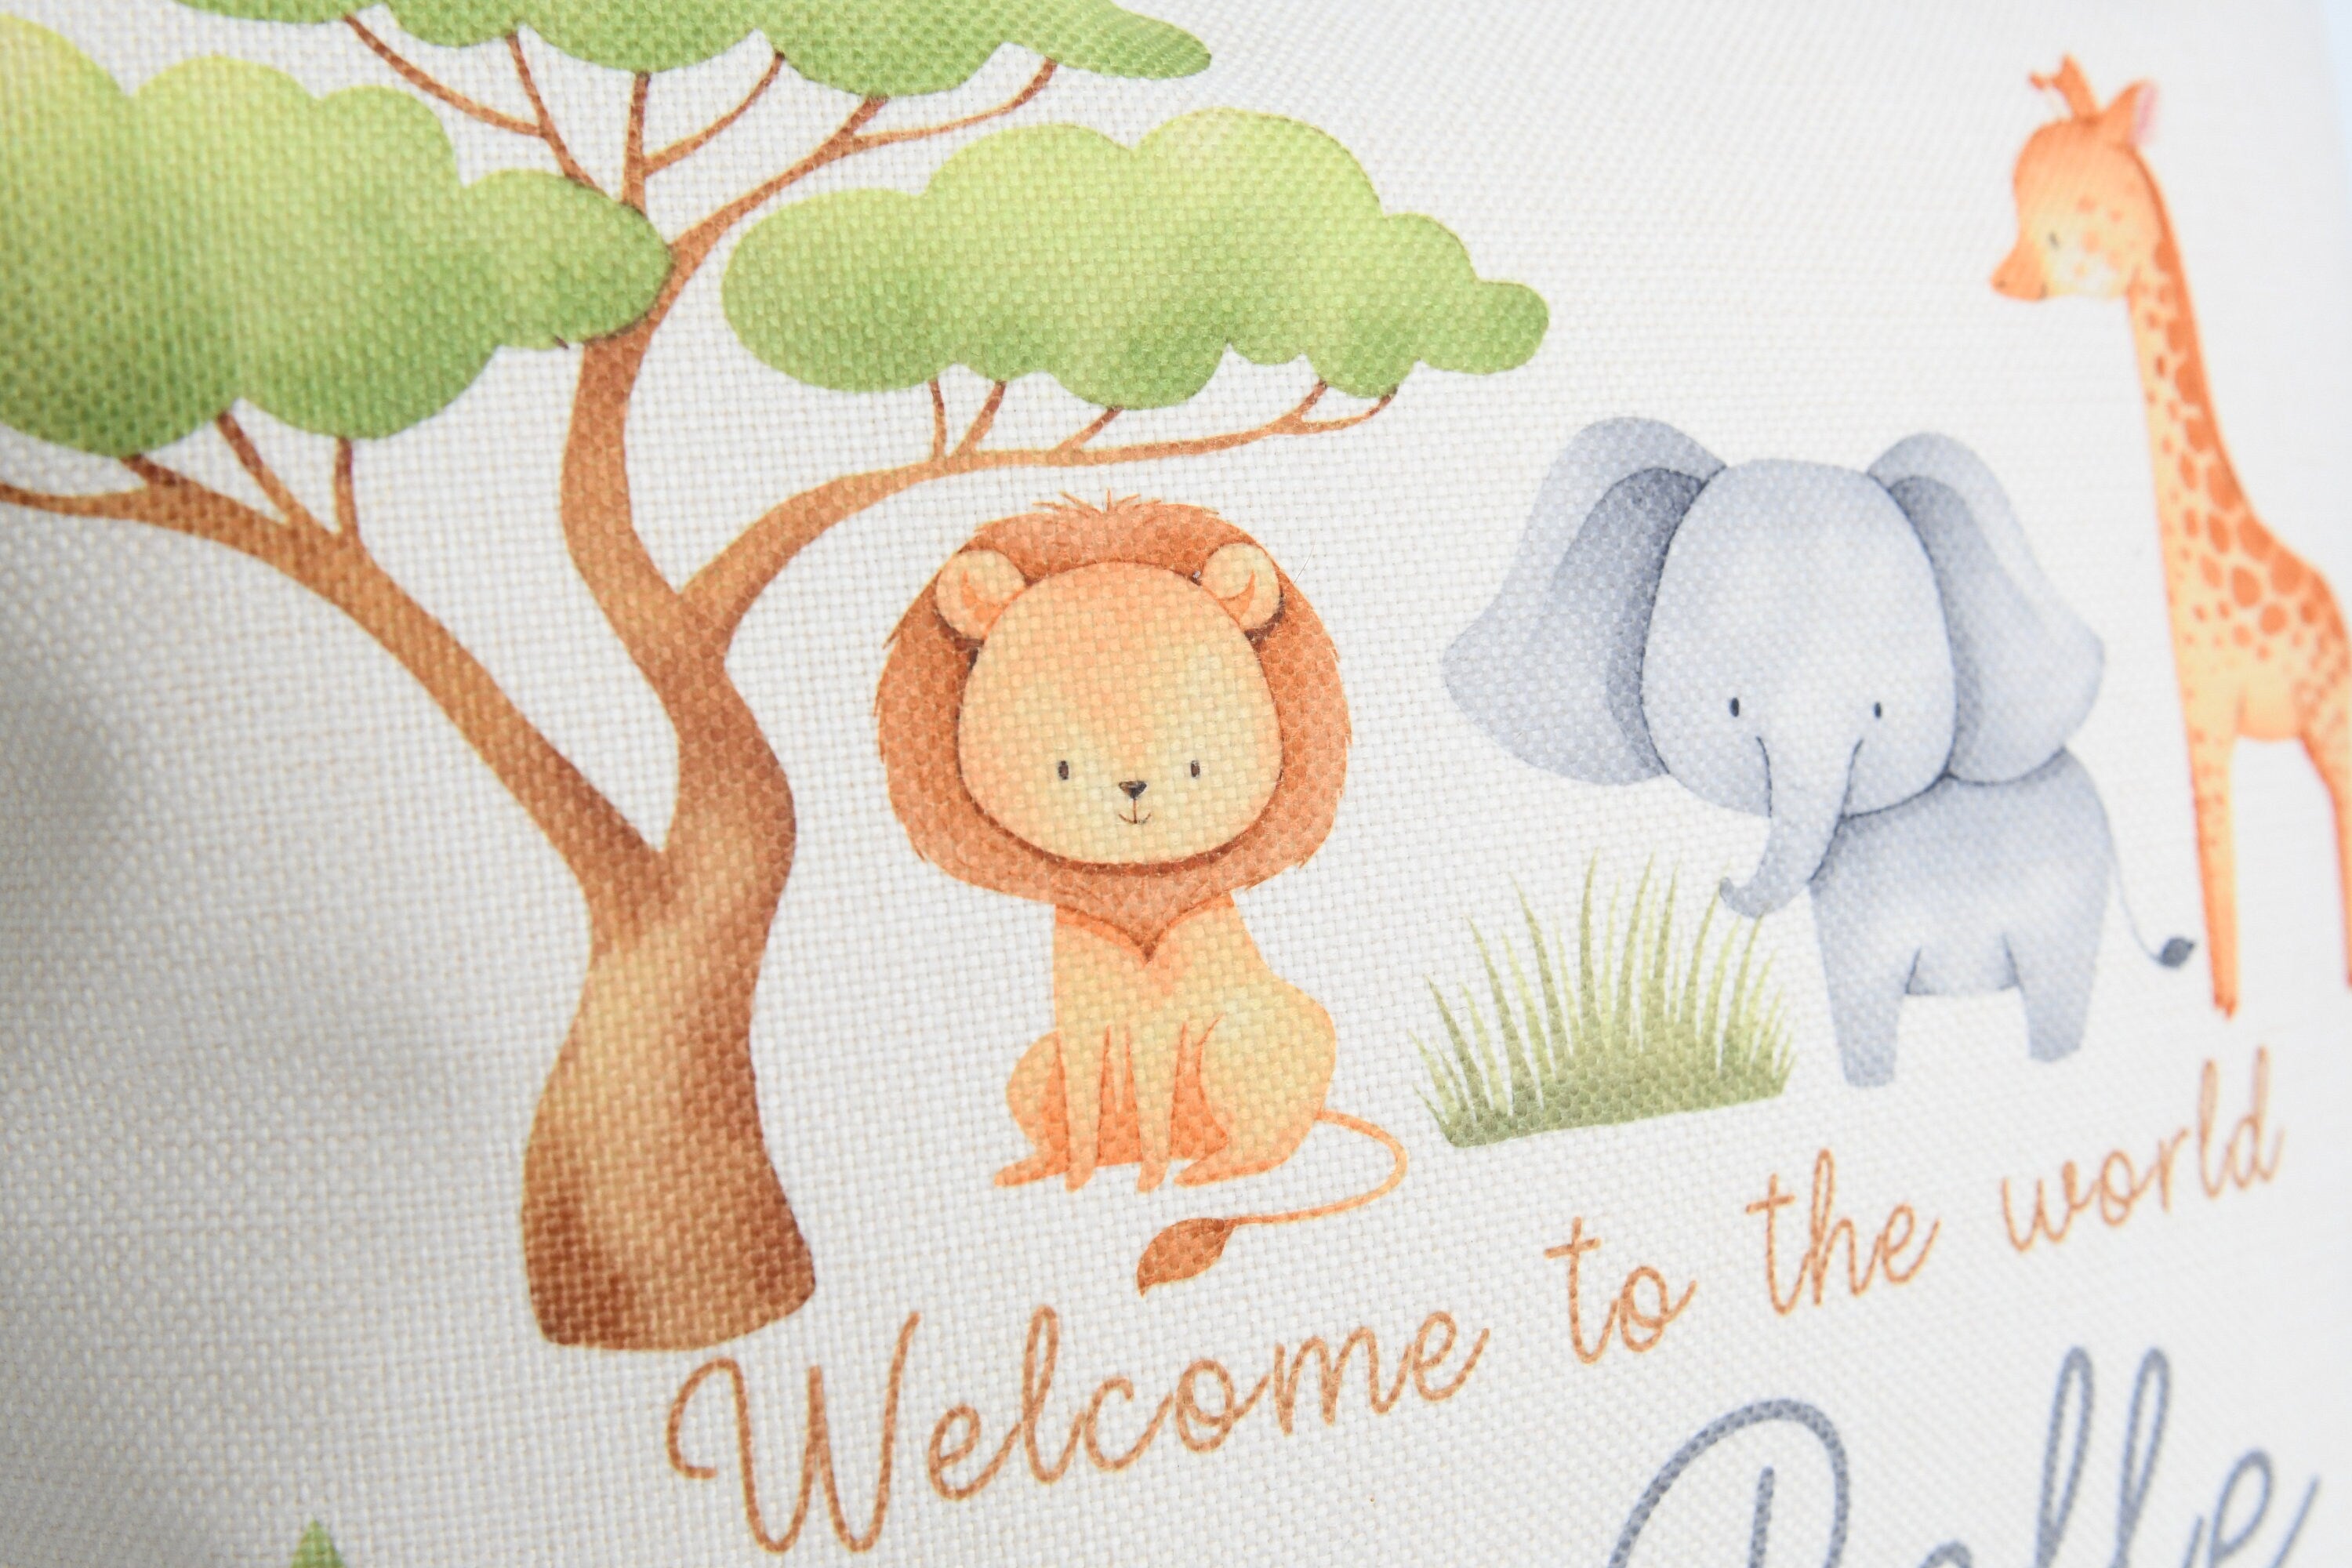 Personalised New Baby Cushion, Welcome To The World Cushion, New Baby Gifts, New Born Baby Gift, safari Cushion, New Baby Present, safari